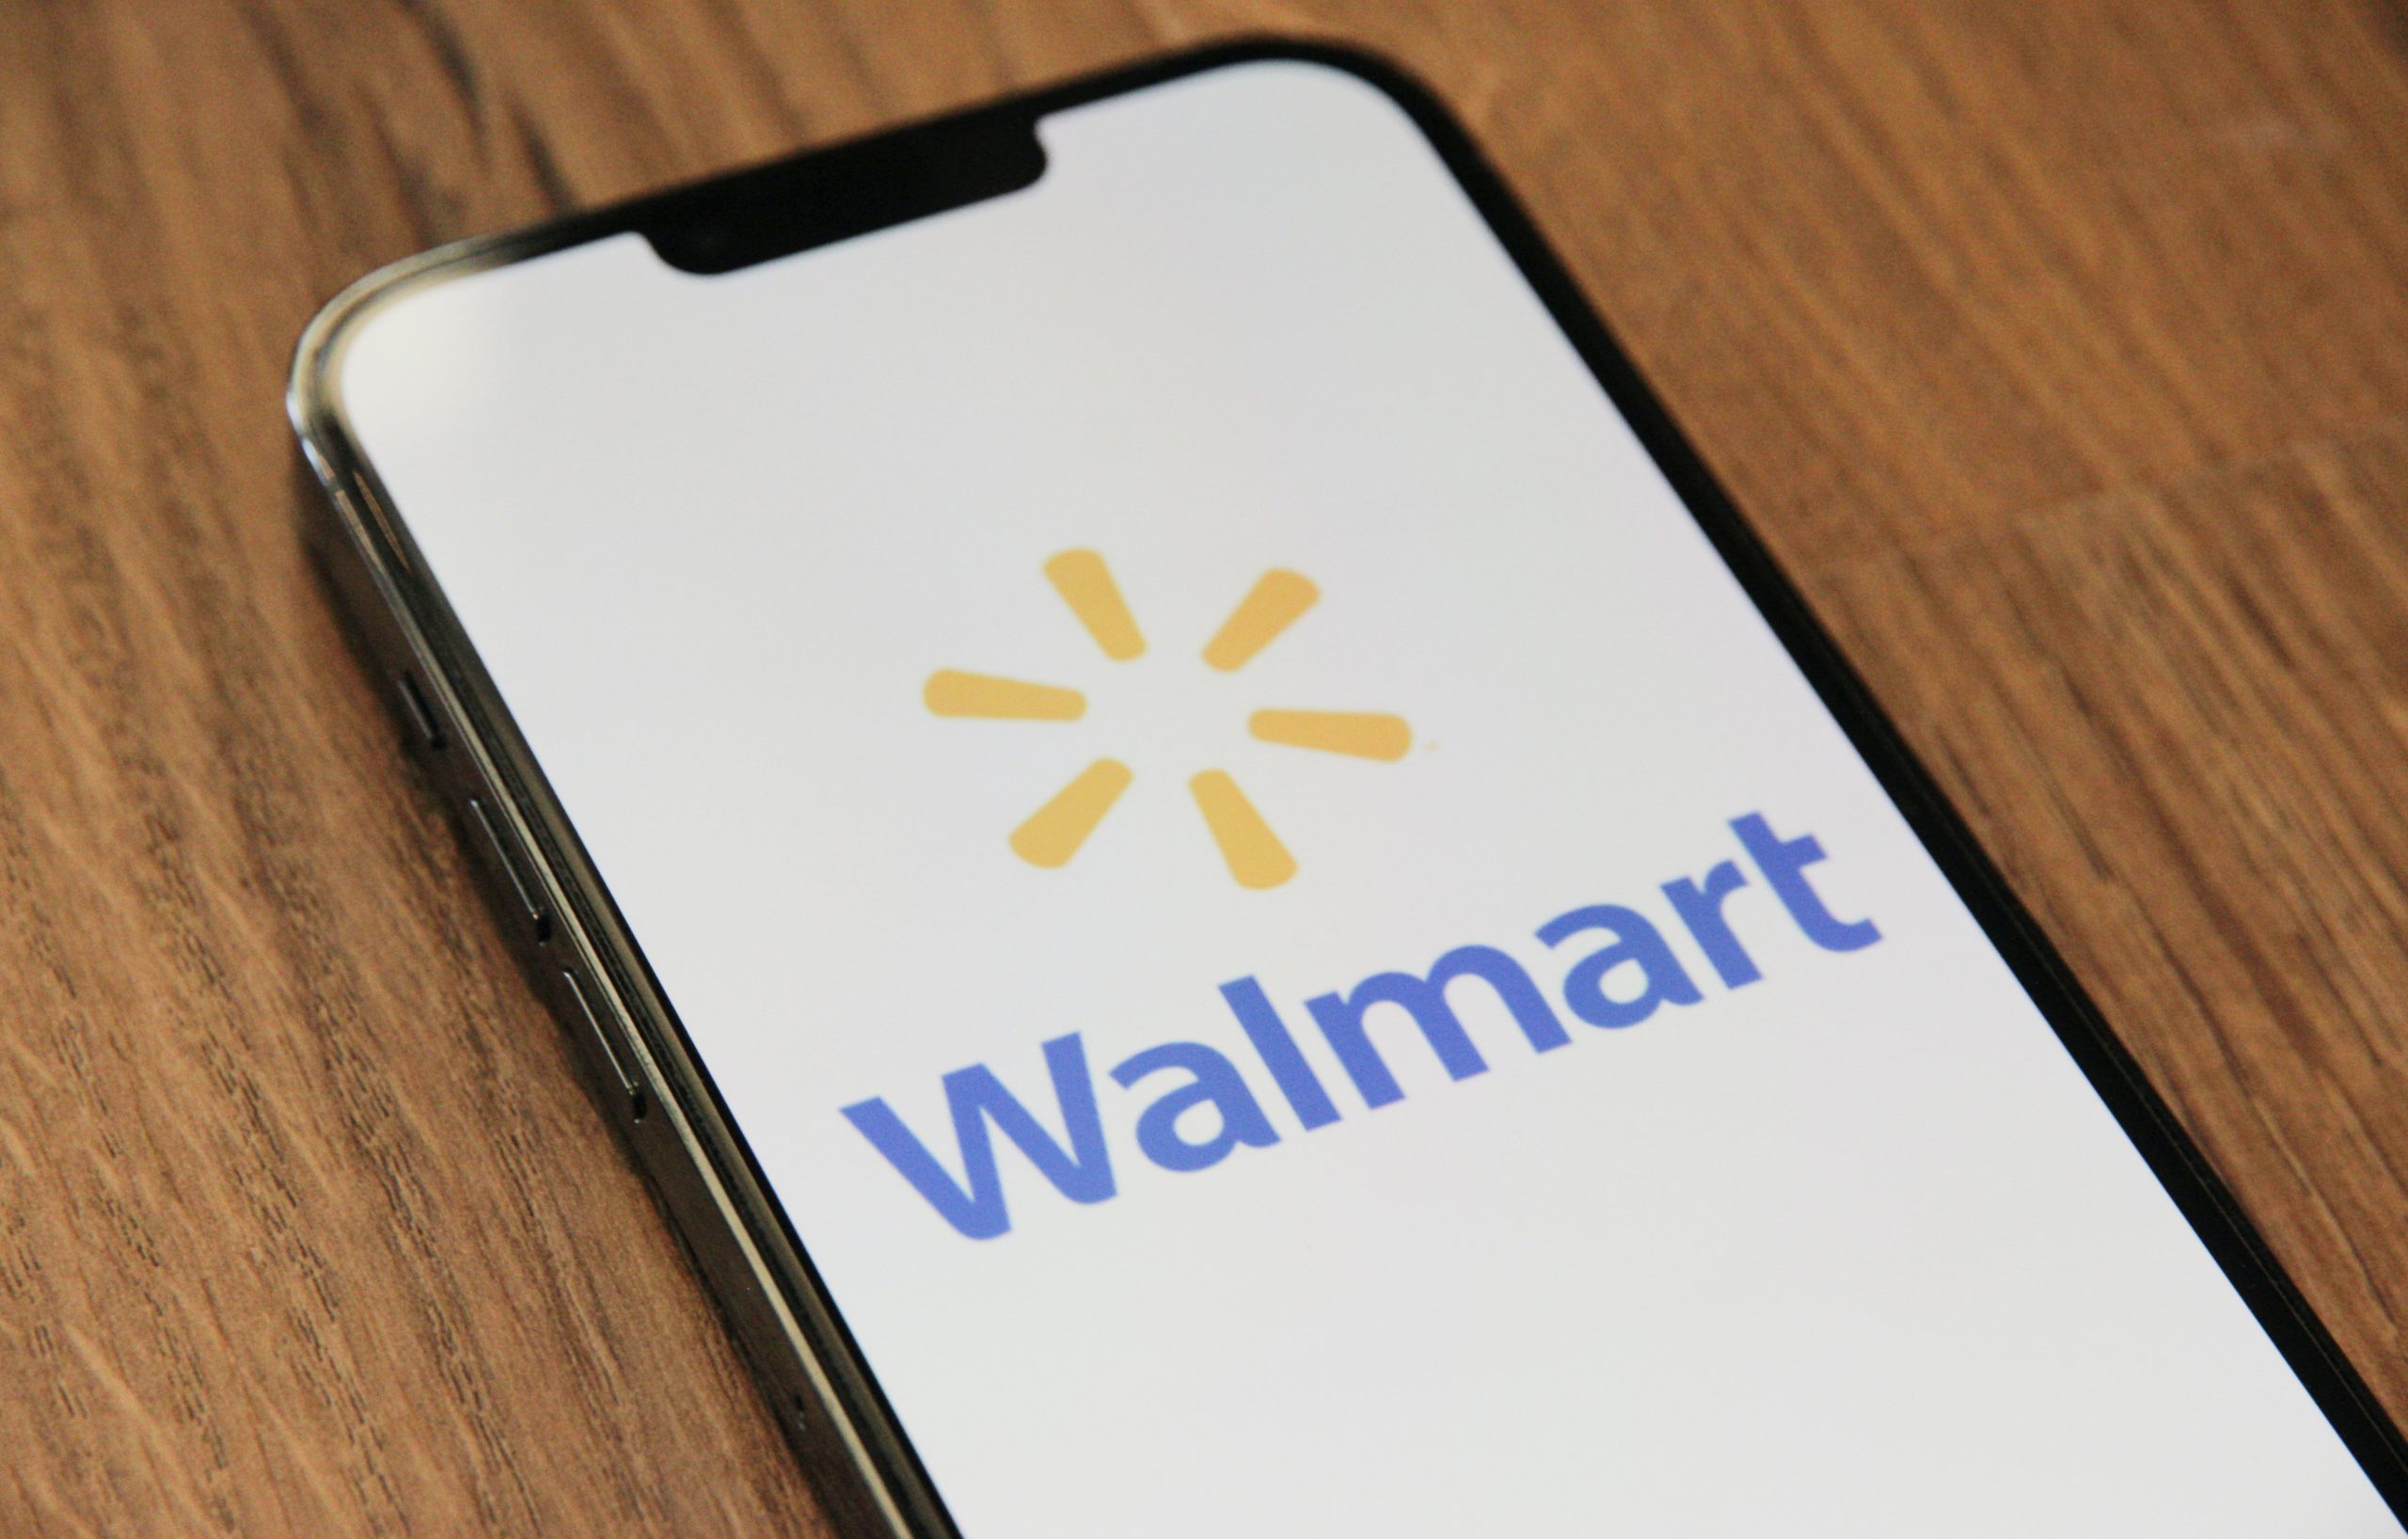 Walmart Jumps Into Roblox With Launch of Walmart Land and